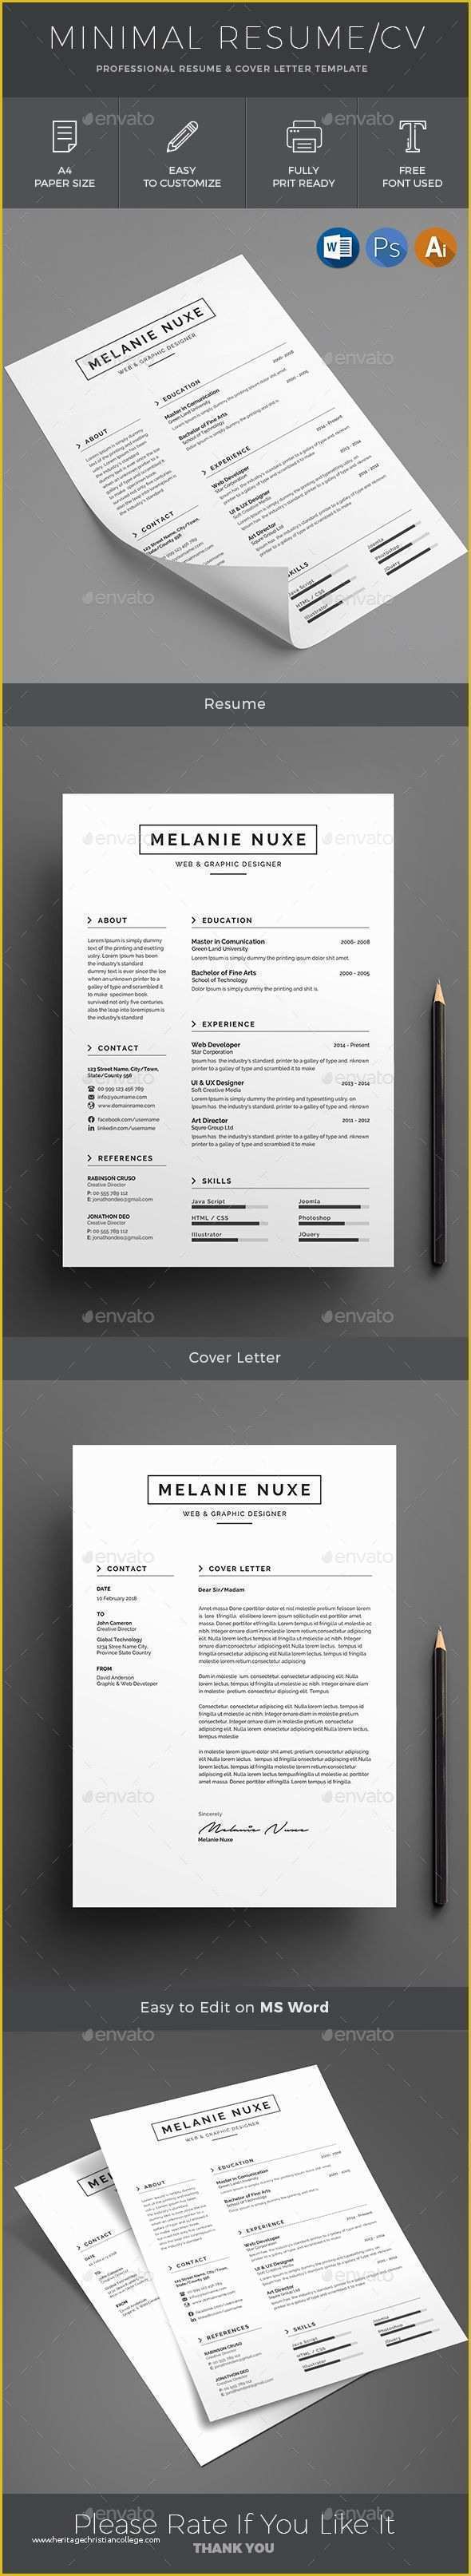 Free Dynamic Resume Templates Of 1000 Ideas About Resume Templates On Pinterest